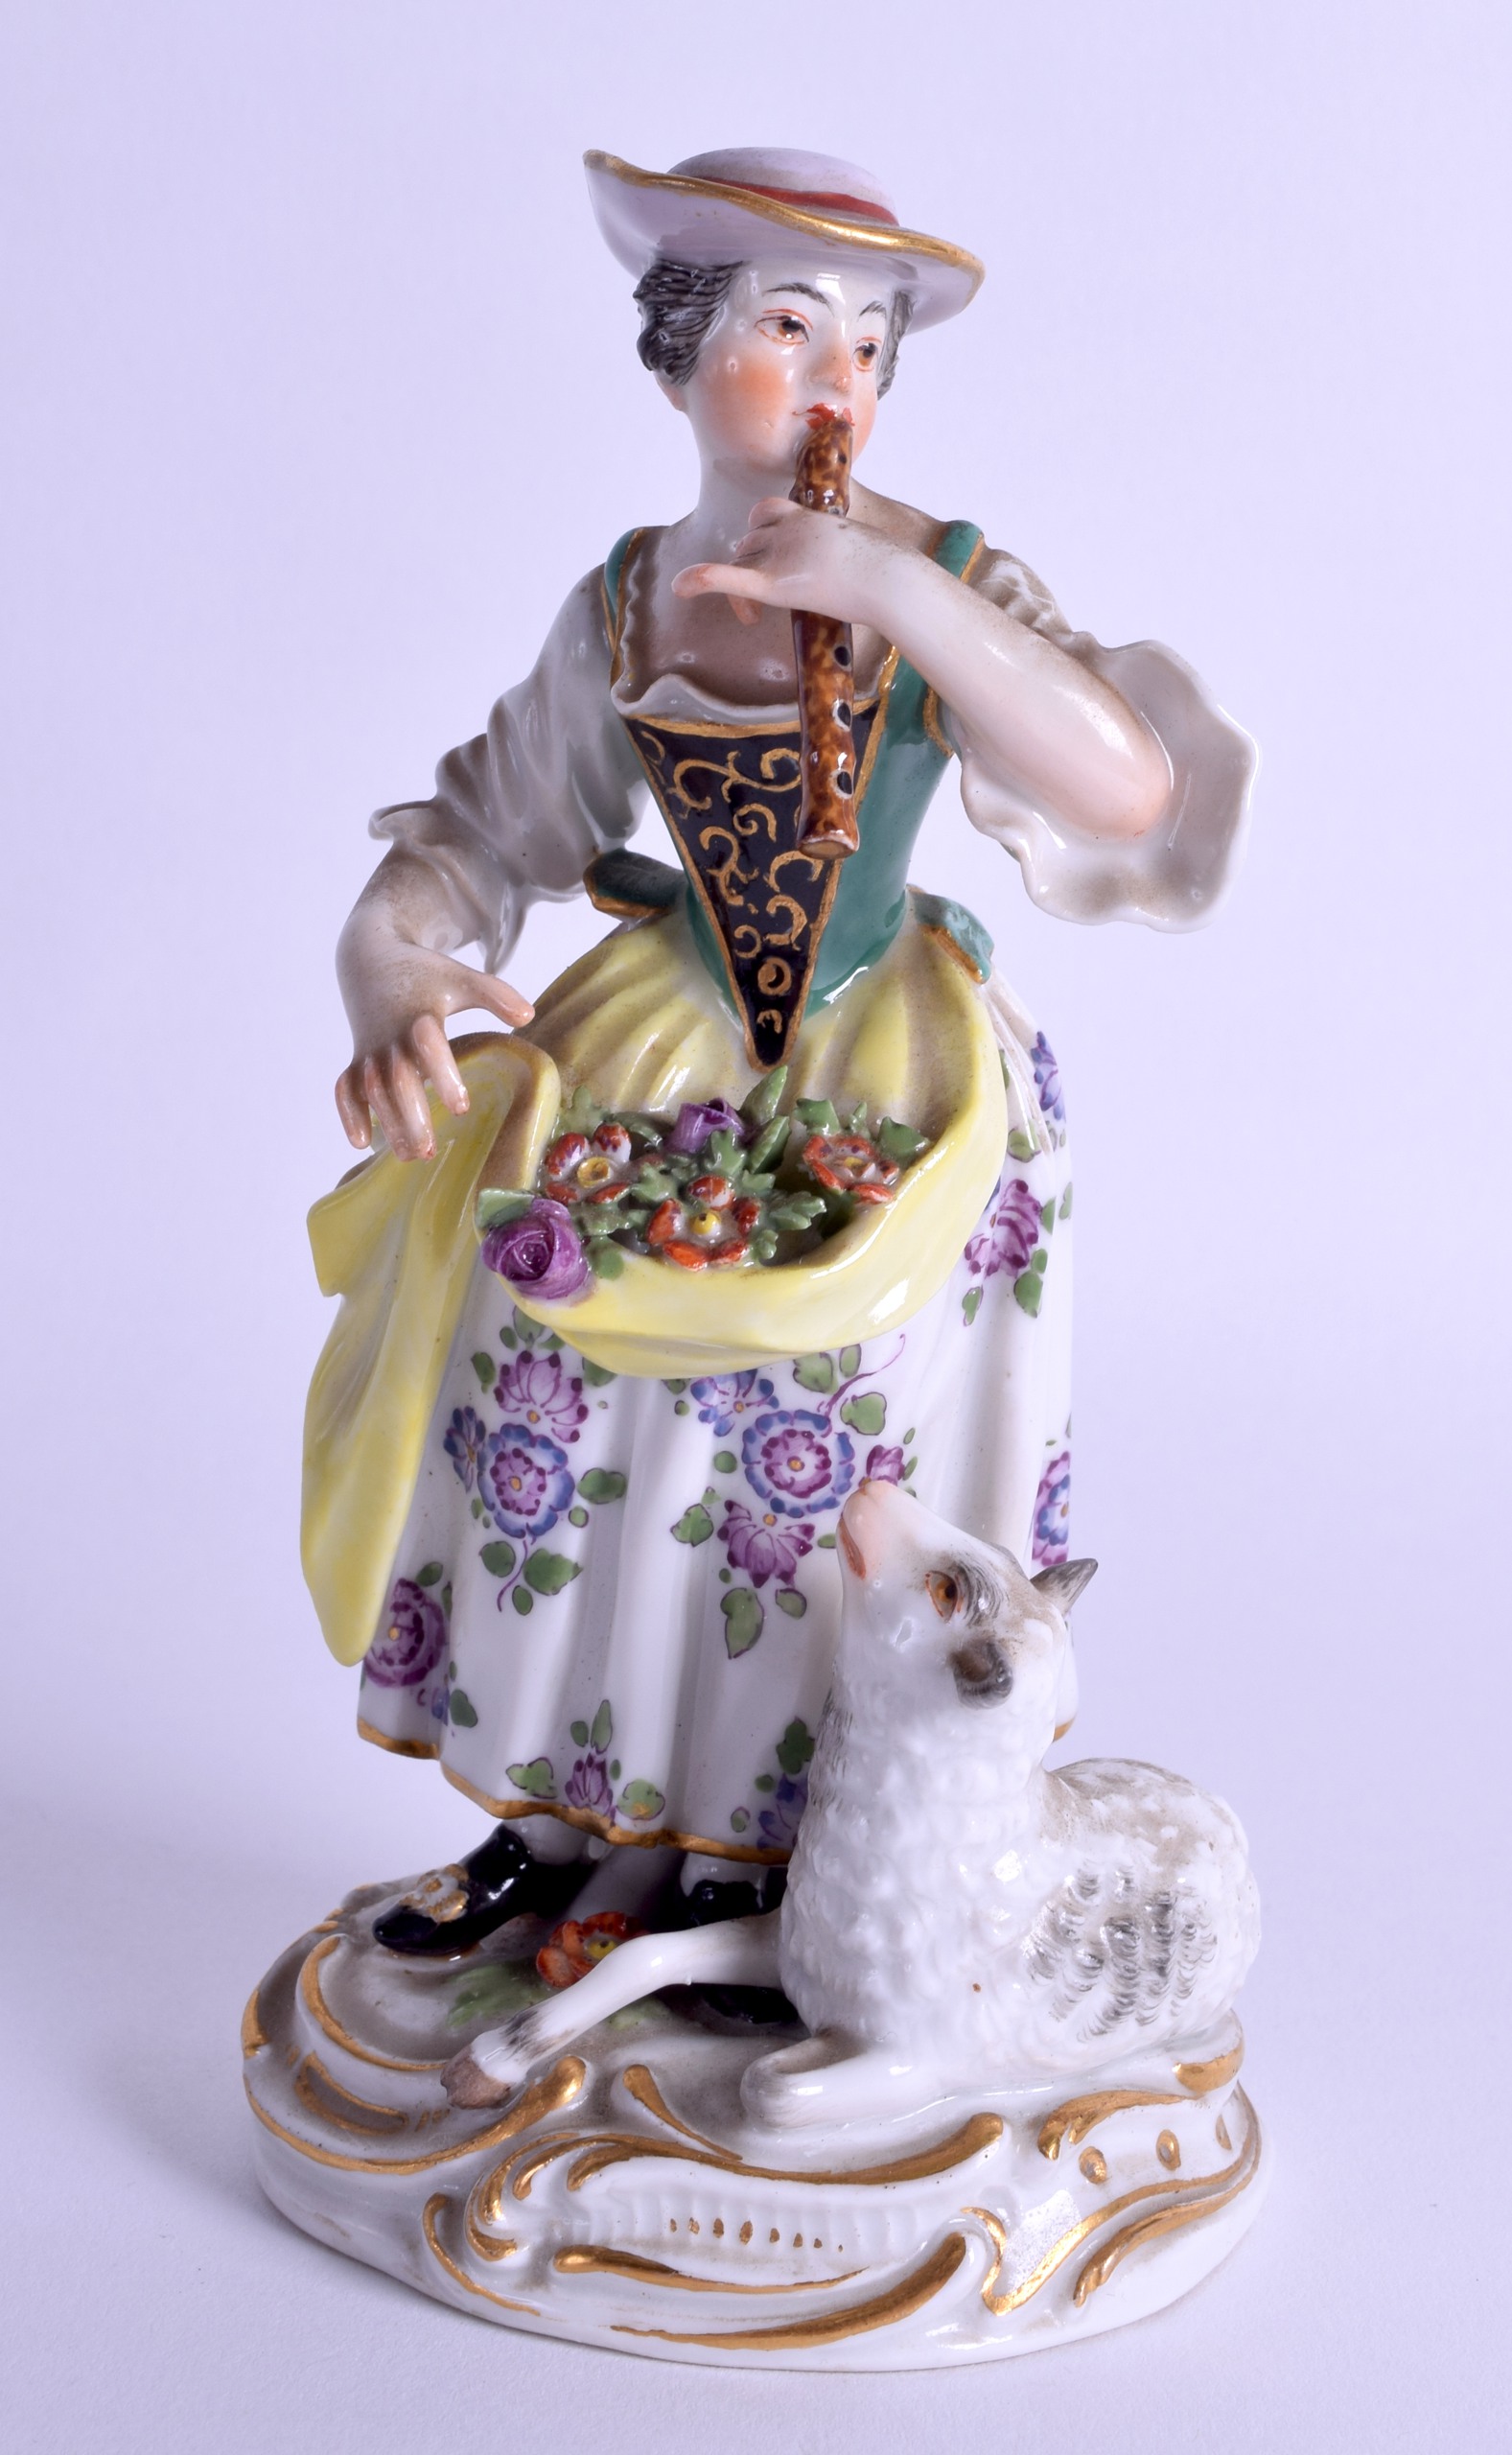 20th c. Meissen figure of a girl playing a flute and standing beside a lamb, blue crossed swords